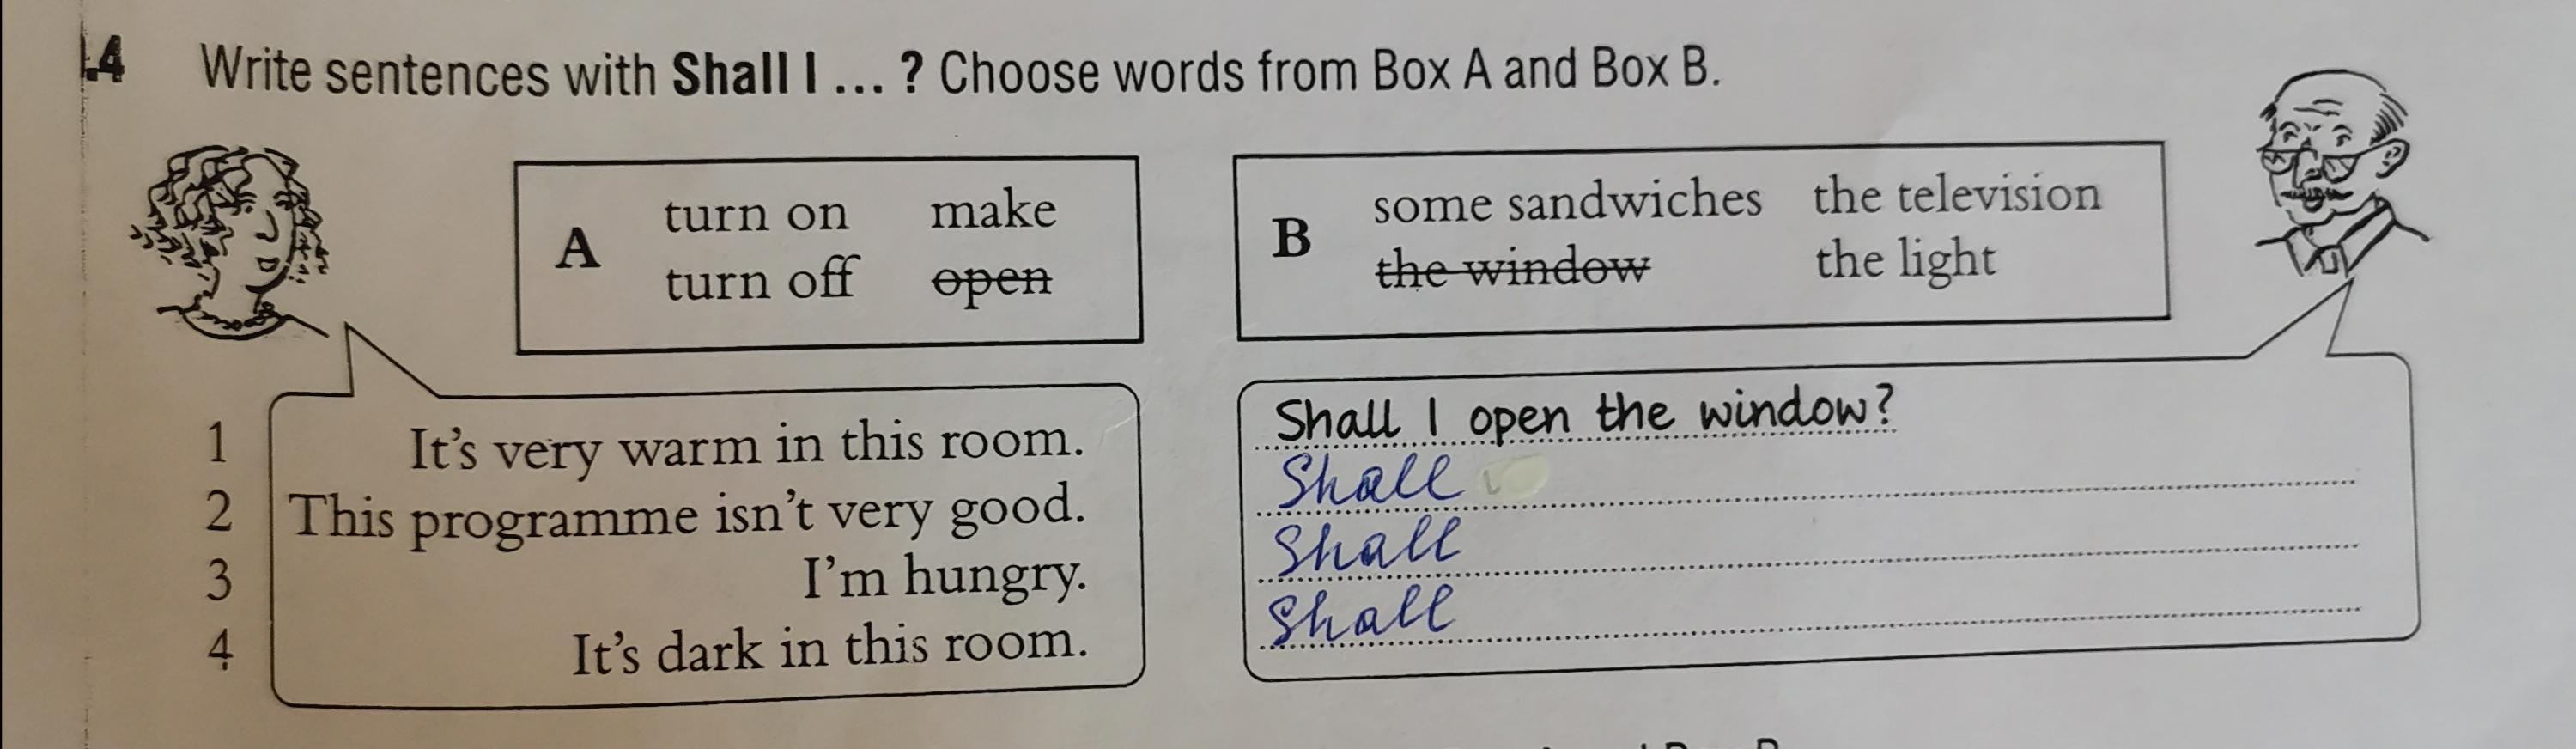 Write sentences with shall we choose from the two Boxes. Write sentences with the Words from the Boxes and Days решить за. Choose a Word from the Box перевод. Write sentences use when a sentence from Box a+a sentence from Box b. Write a sentence from the box